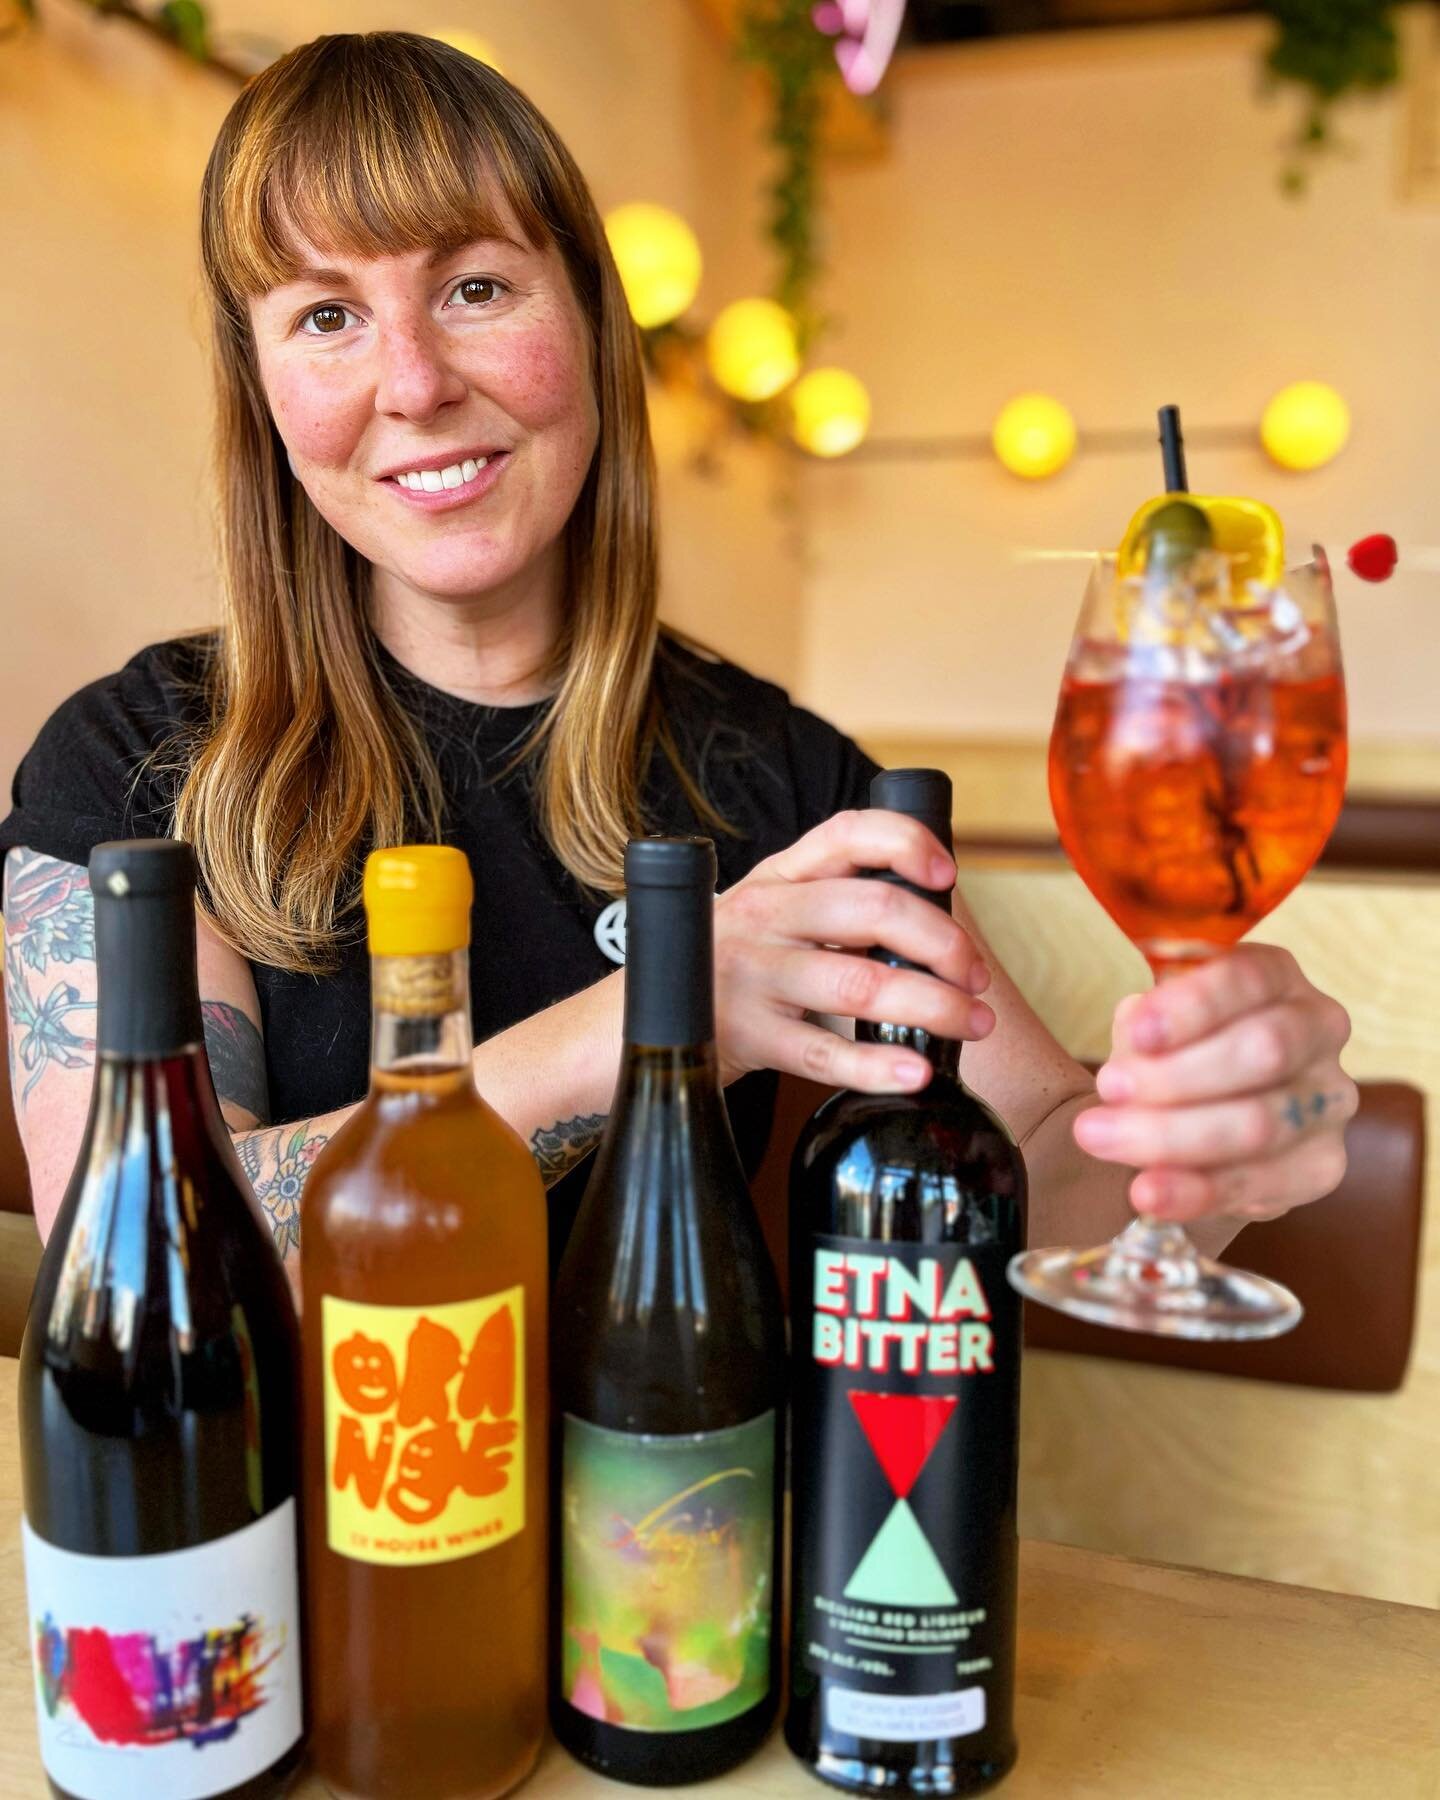 NEW EMMA&rsquo;S PICKS!!

🍷🍂🍷🍂🍷🍂🍷🍂🍷🍂🍷🍂🍷🍂🍷🍂🍷🍂

Emma&rsquo;s kinda mellowed out with this round of picks. Still nothing too heavy, but think less acid and more mineral/earthy notes. It&rsquo;s fall after all! AND YES YOU CAN DRINK SPR